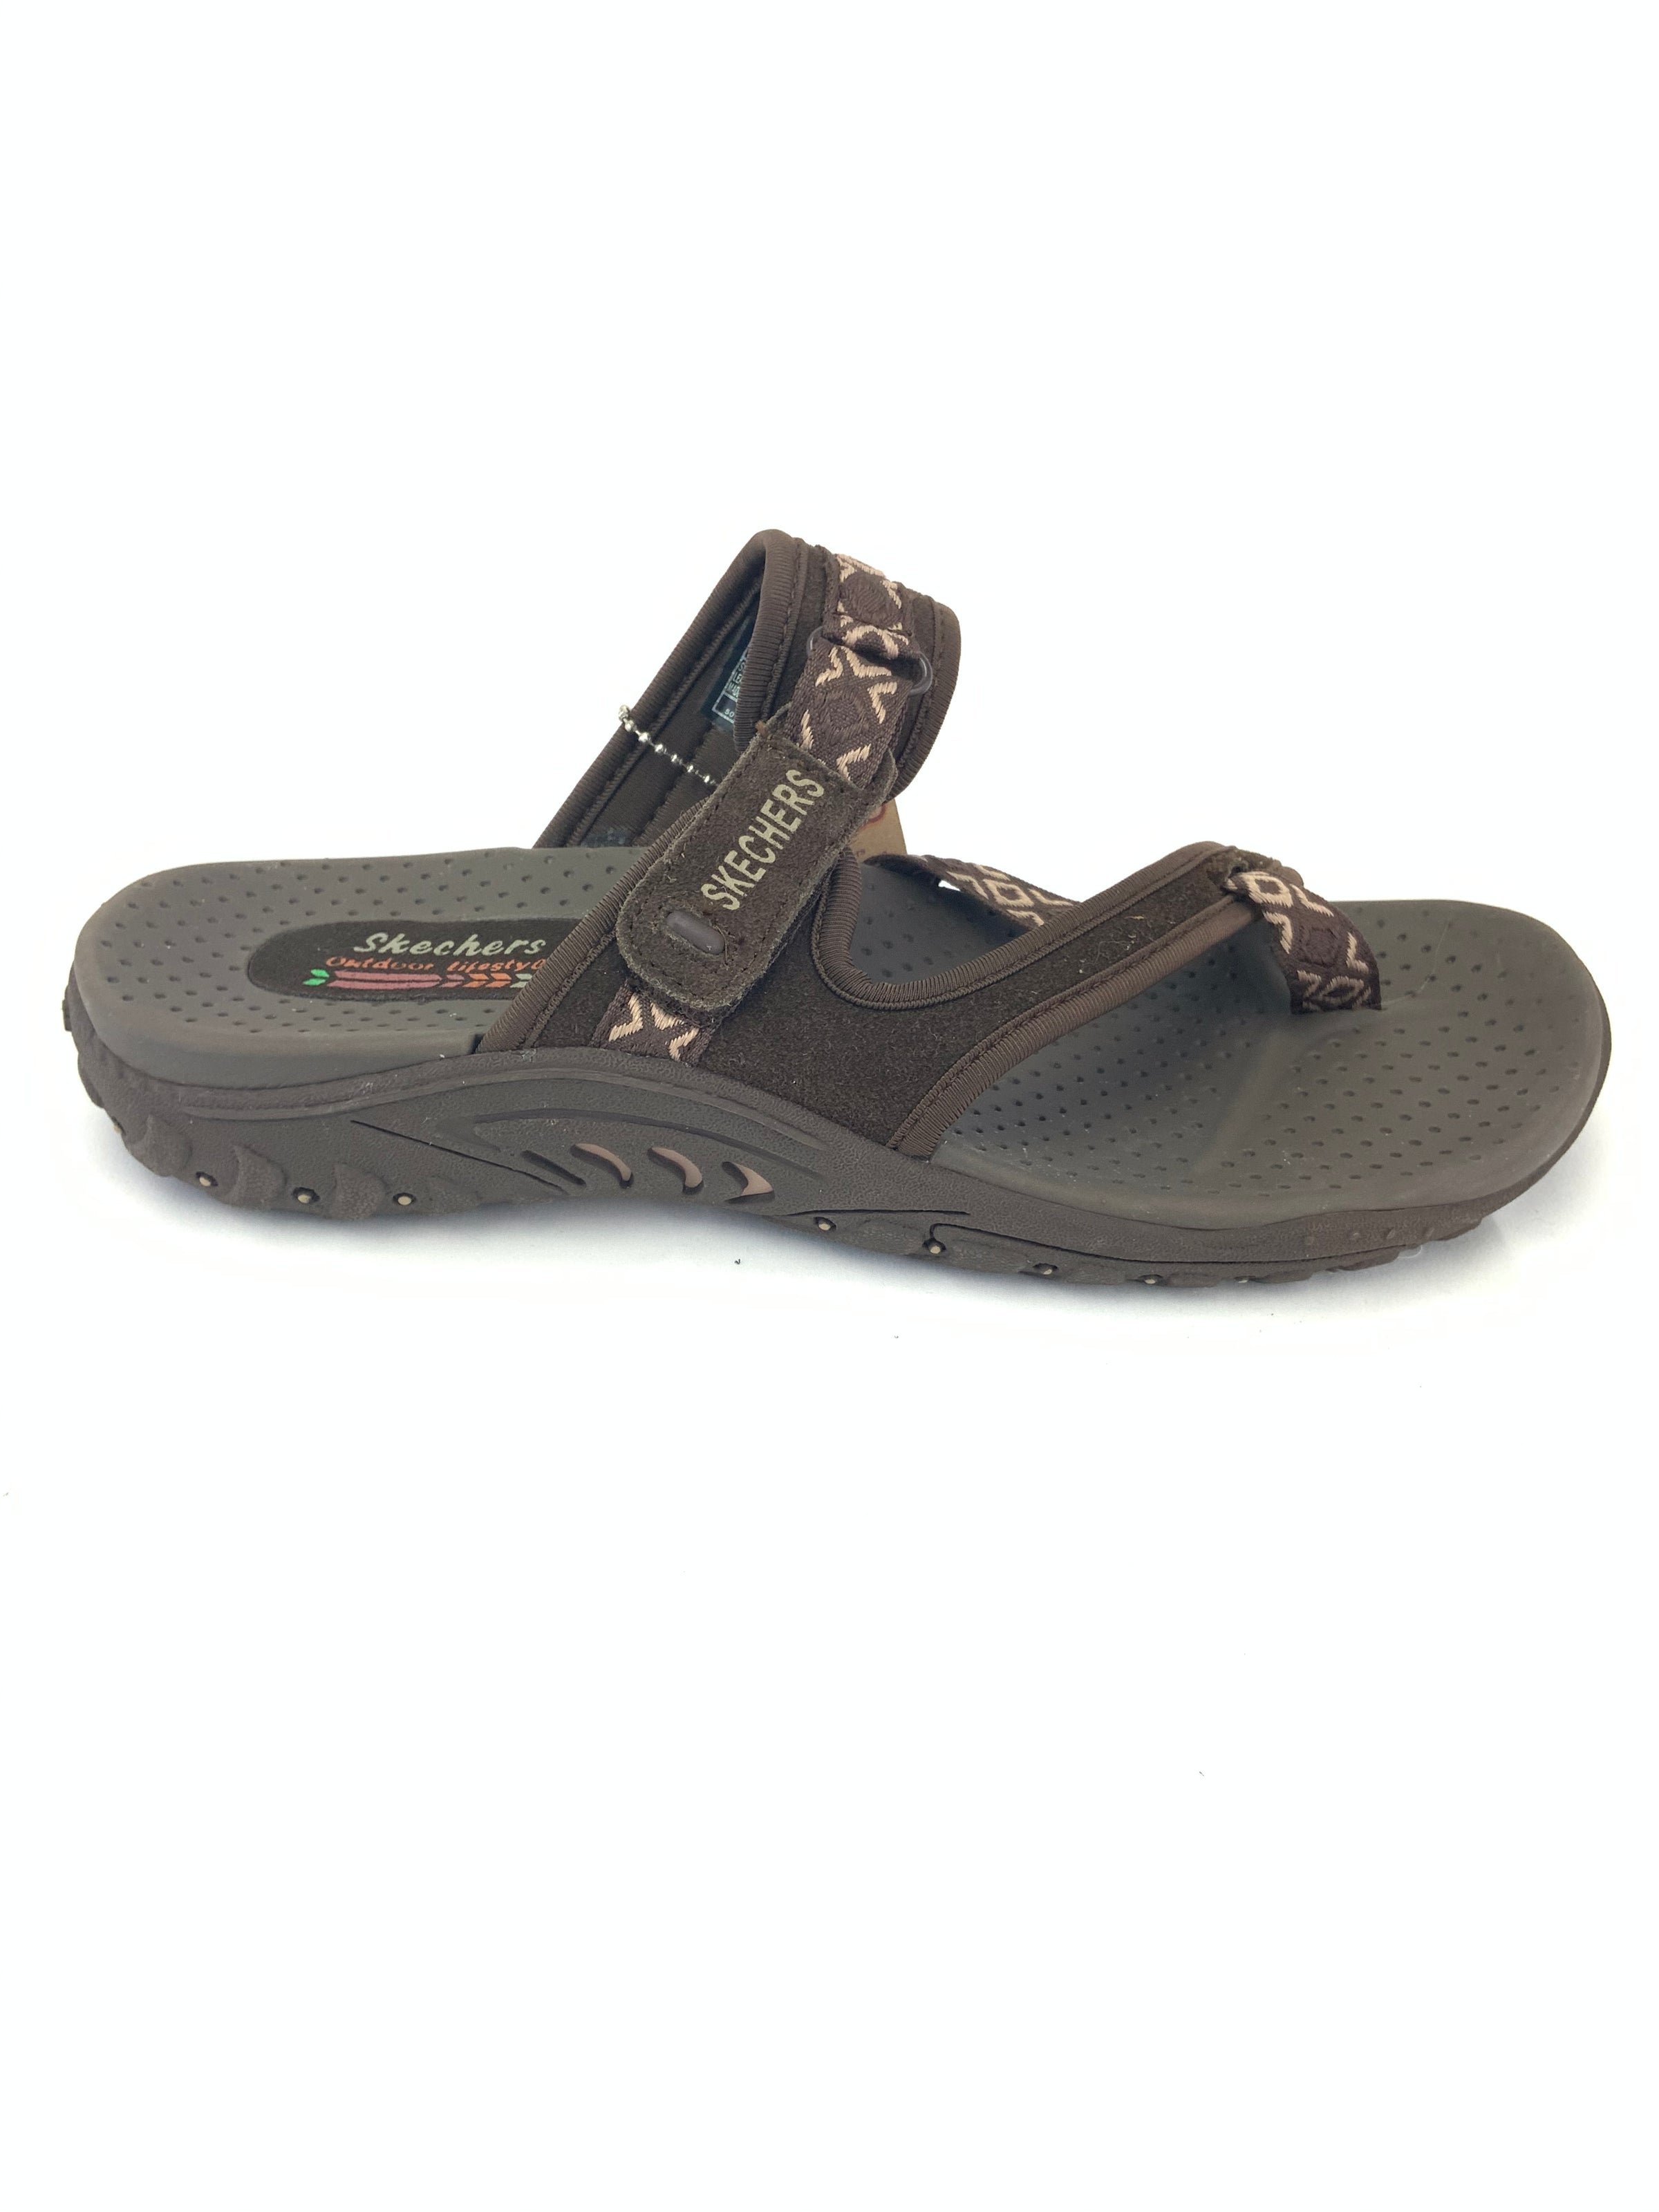 Skechers Reggaes Outdoor Lifestyle Sandals Size 9